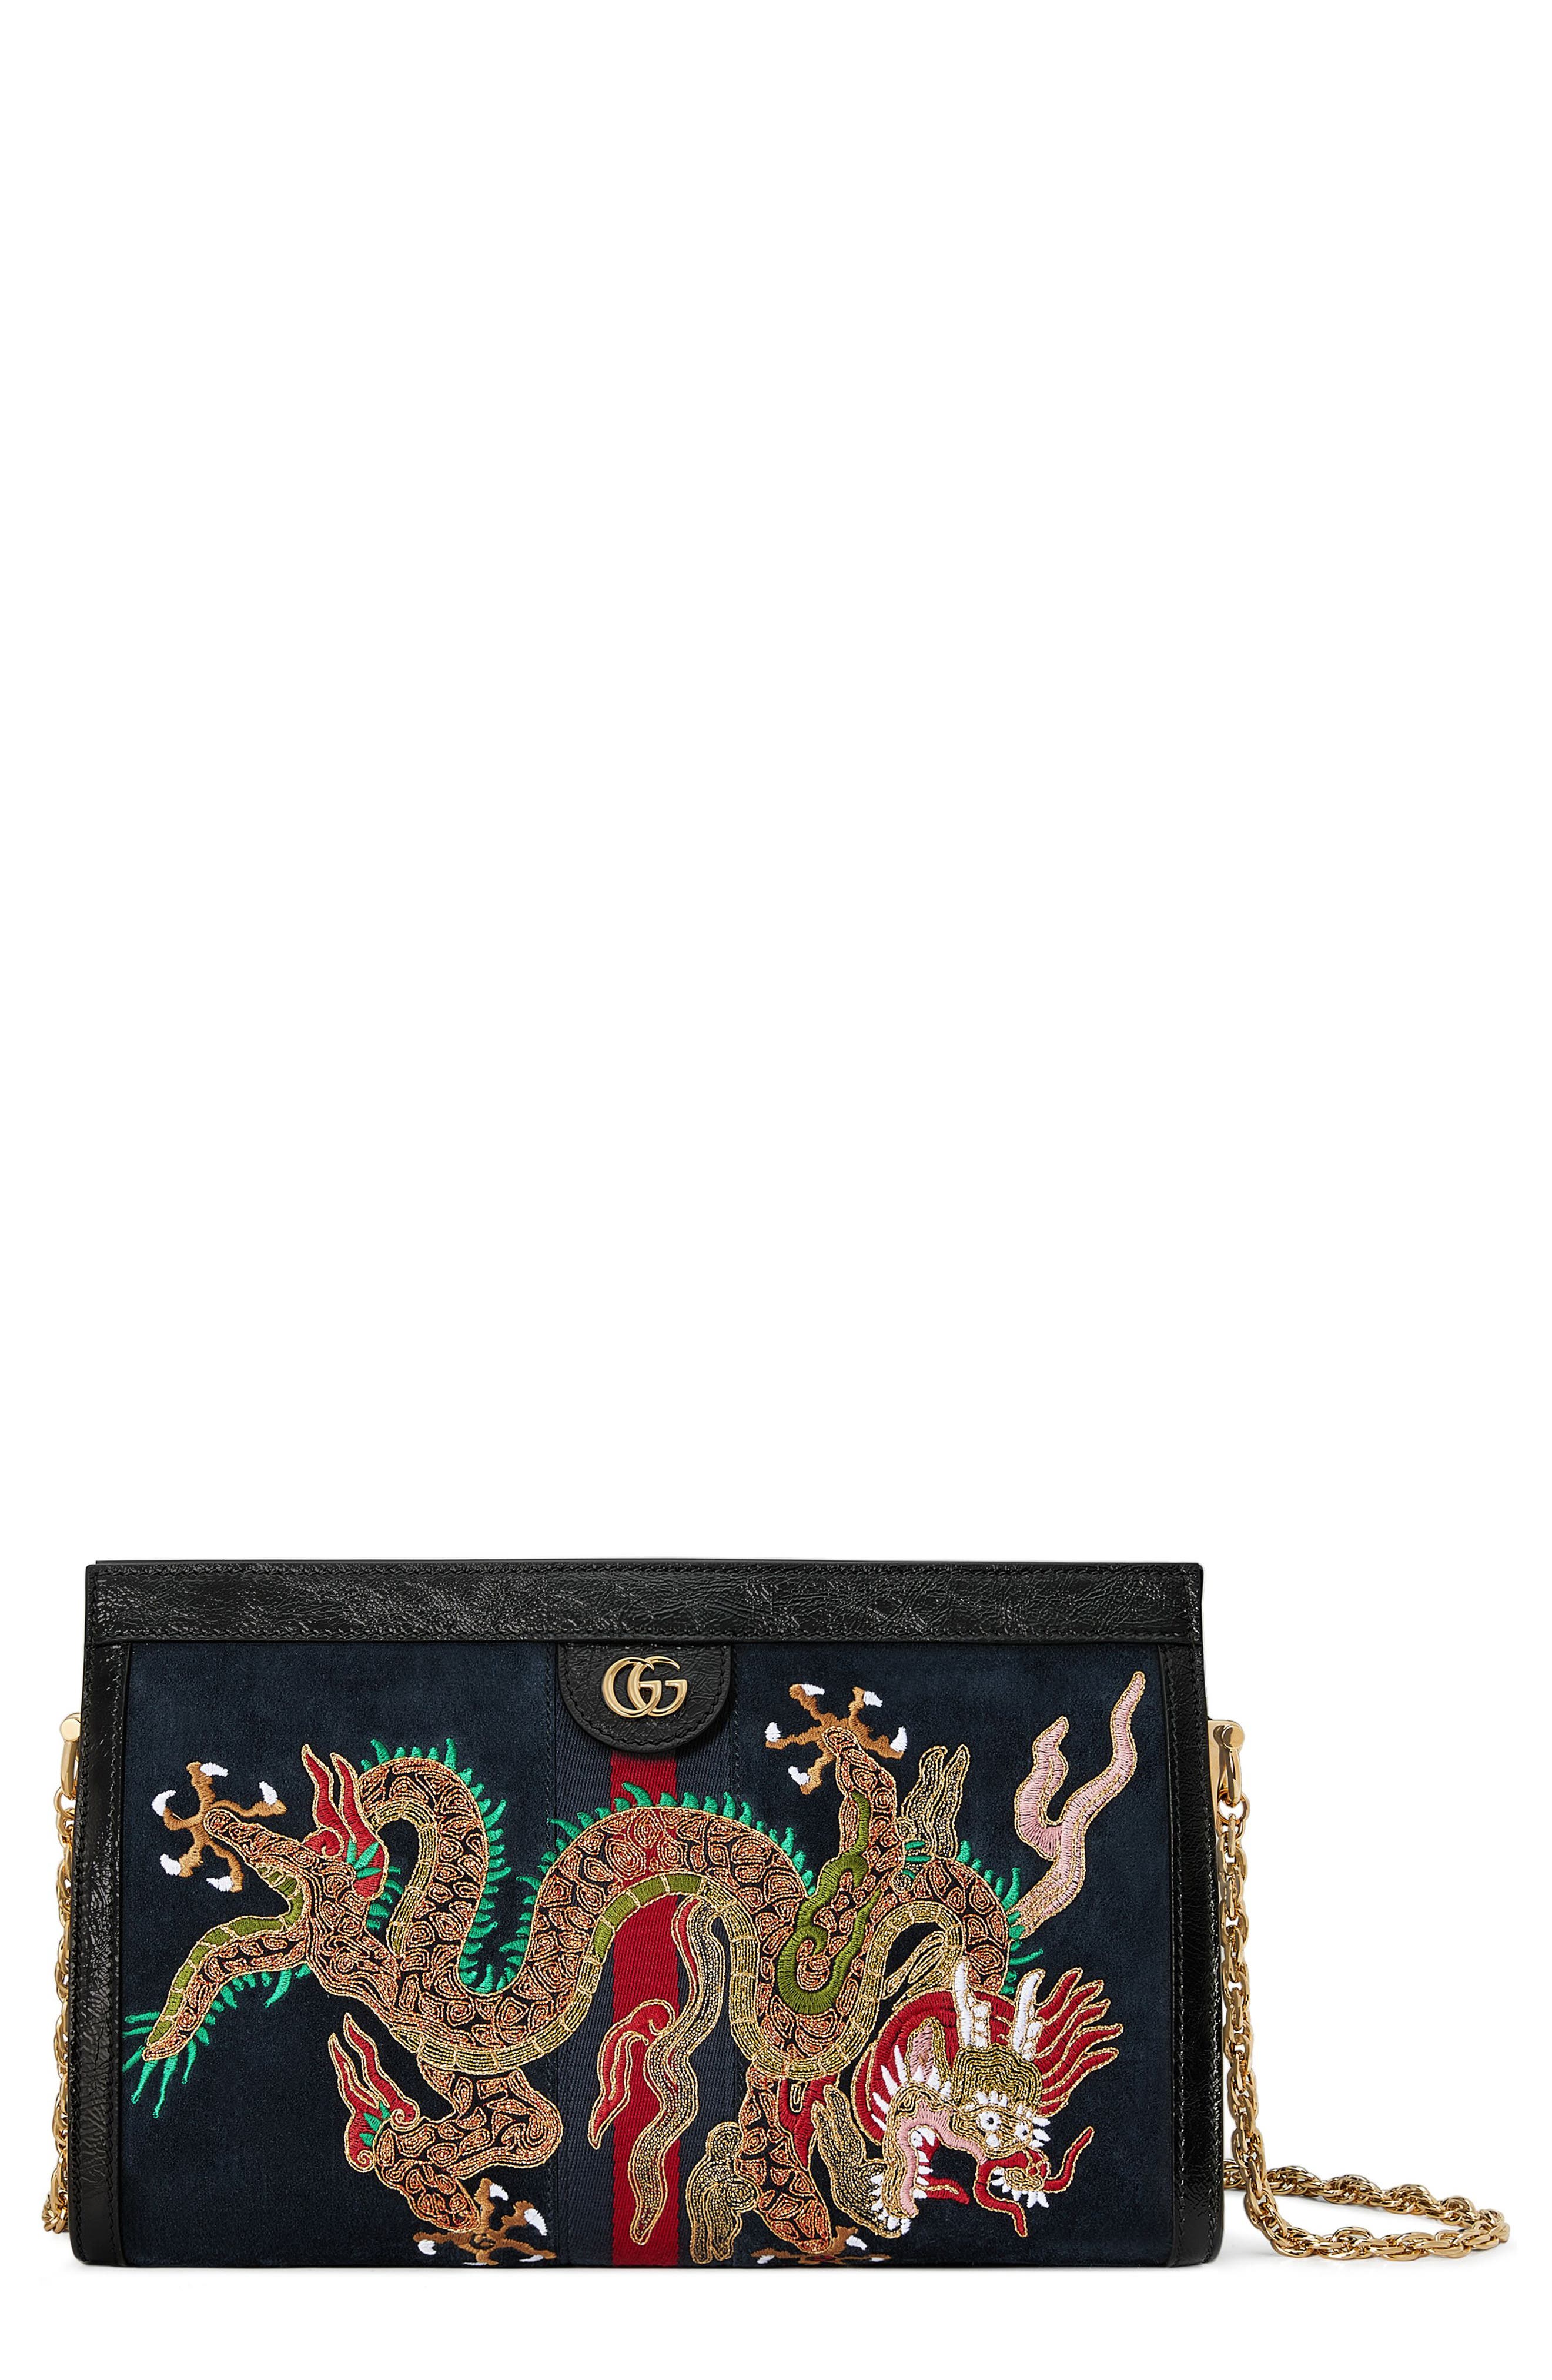 Gucci Ophidia Embroidered Dragon Suede 